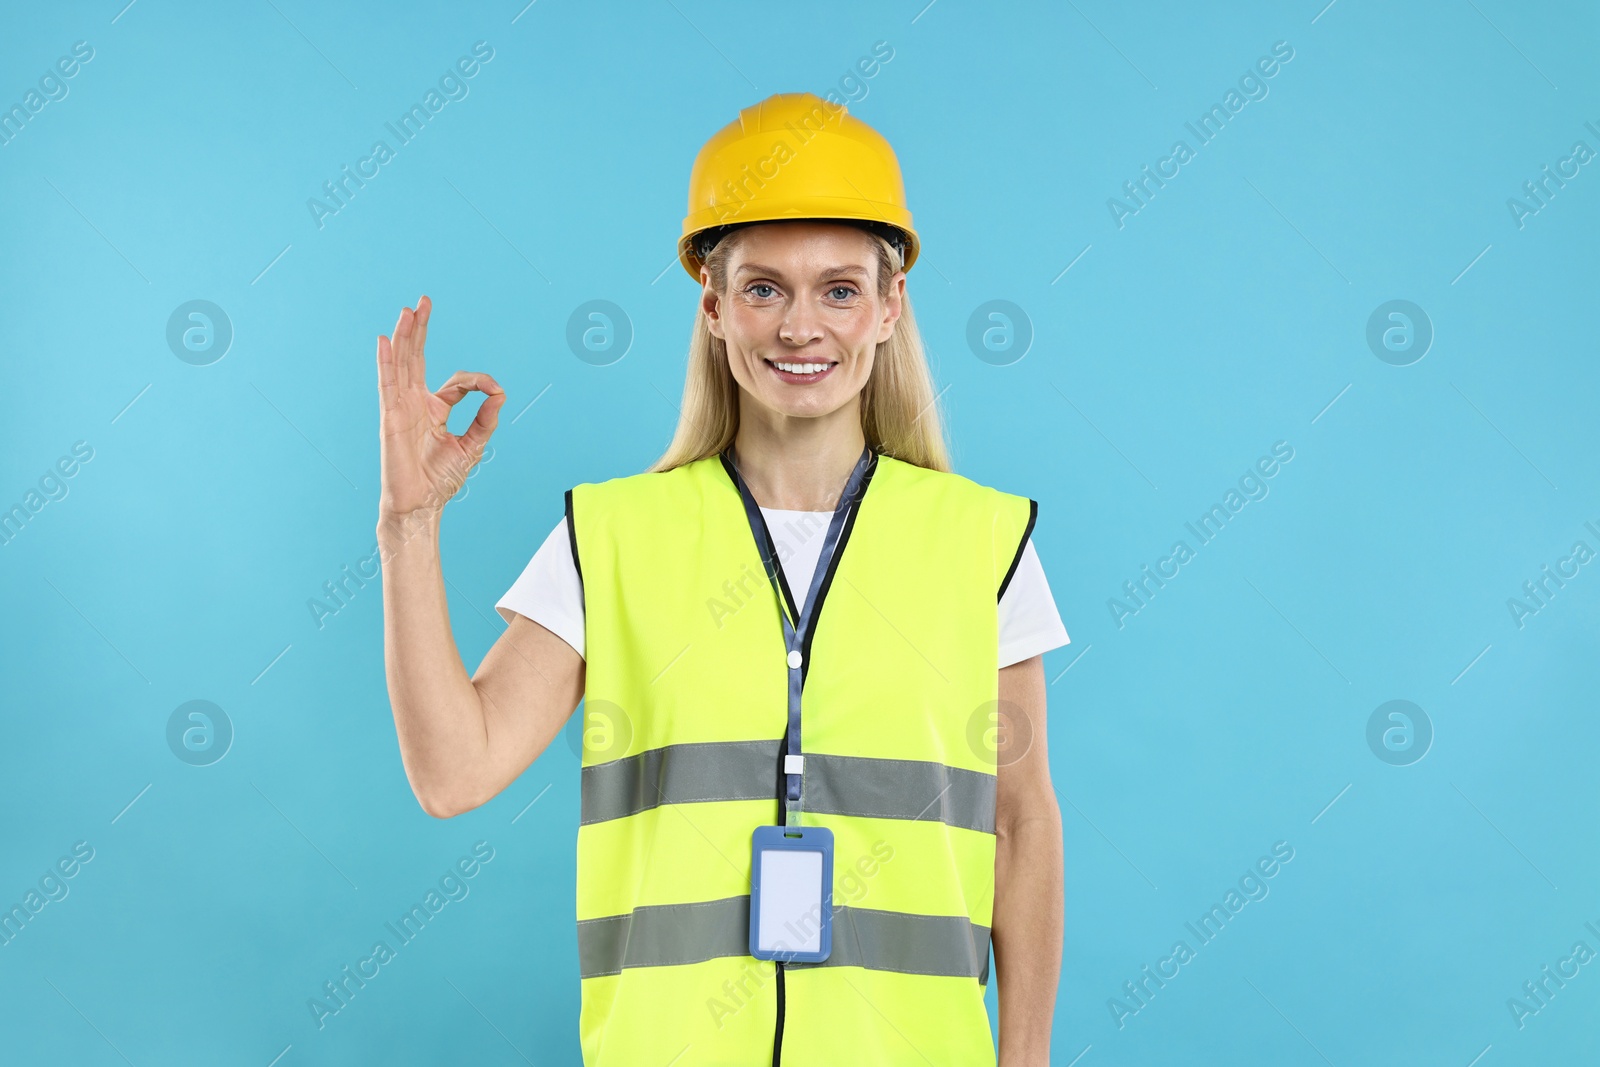 Photo of Engineer with hard hat and badge showing ok gesture on light blue background